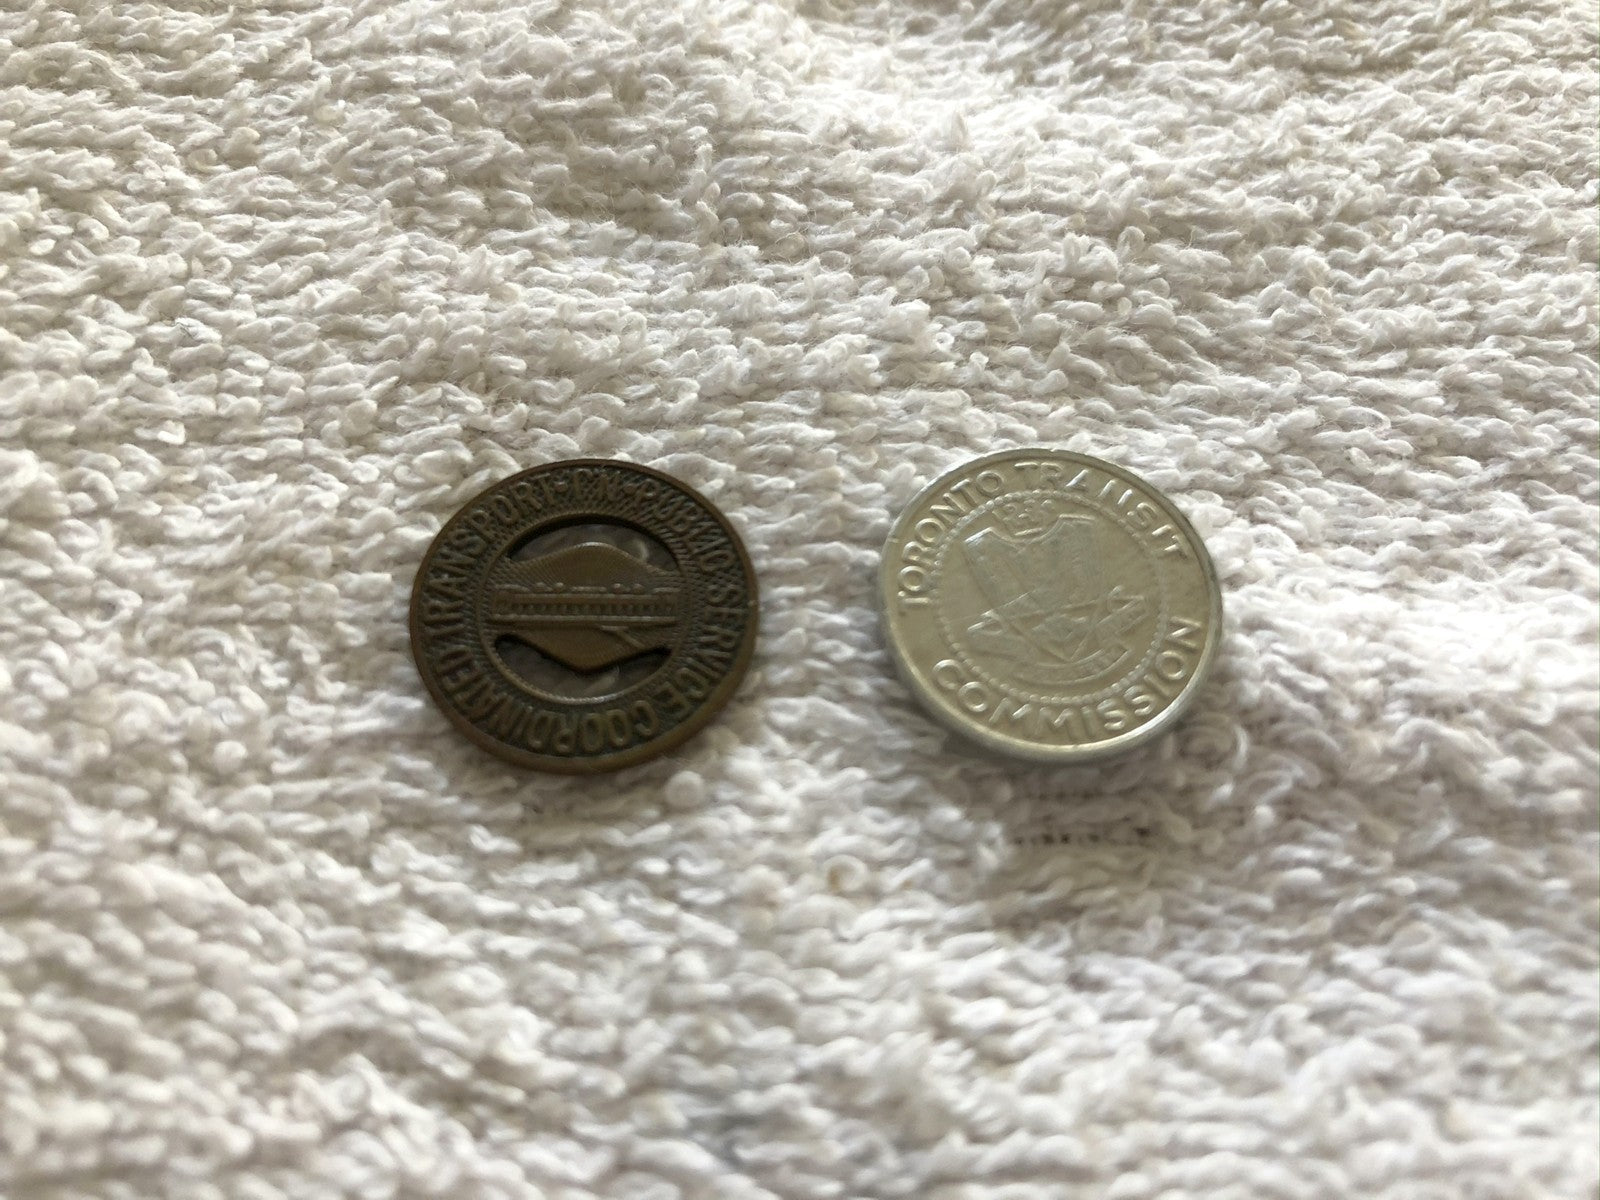 New Jersey and Toronto vintage transit tokens